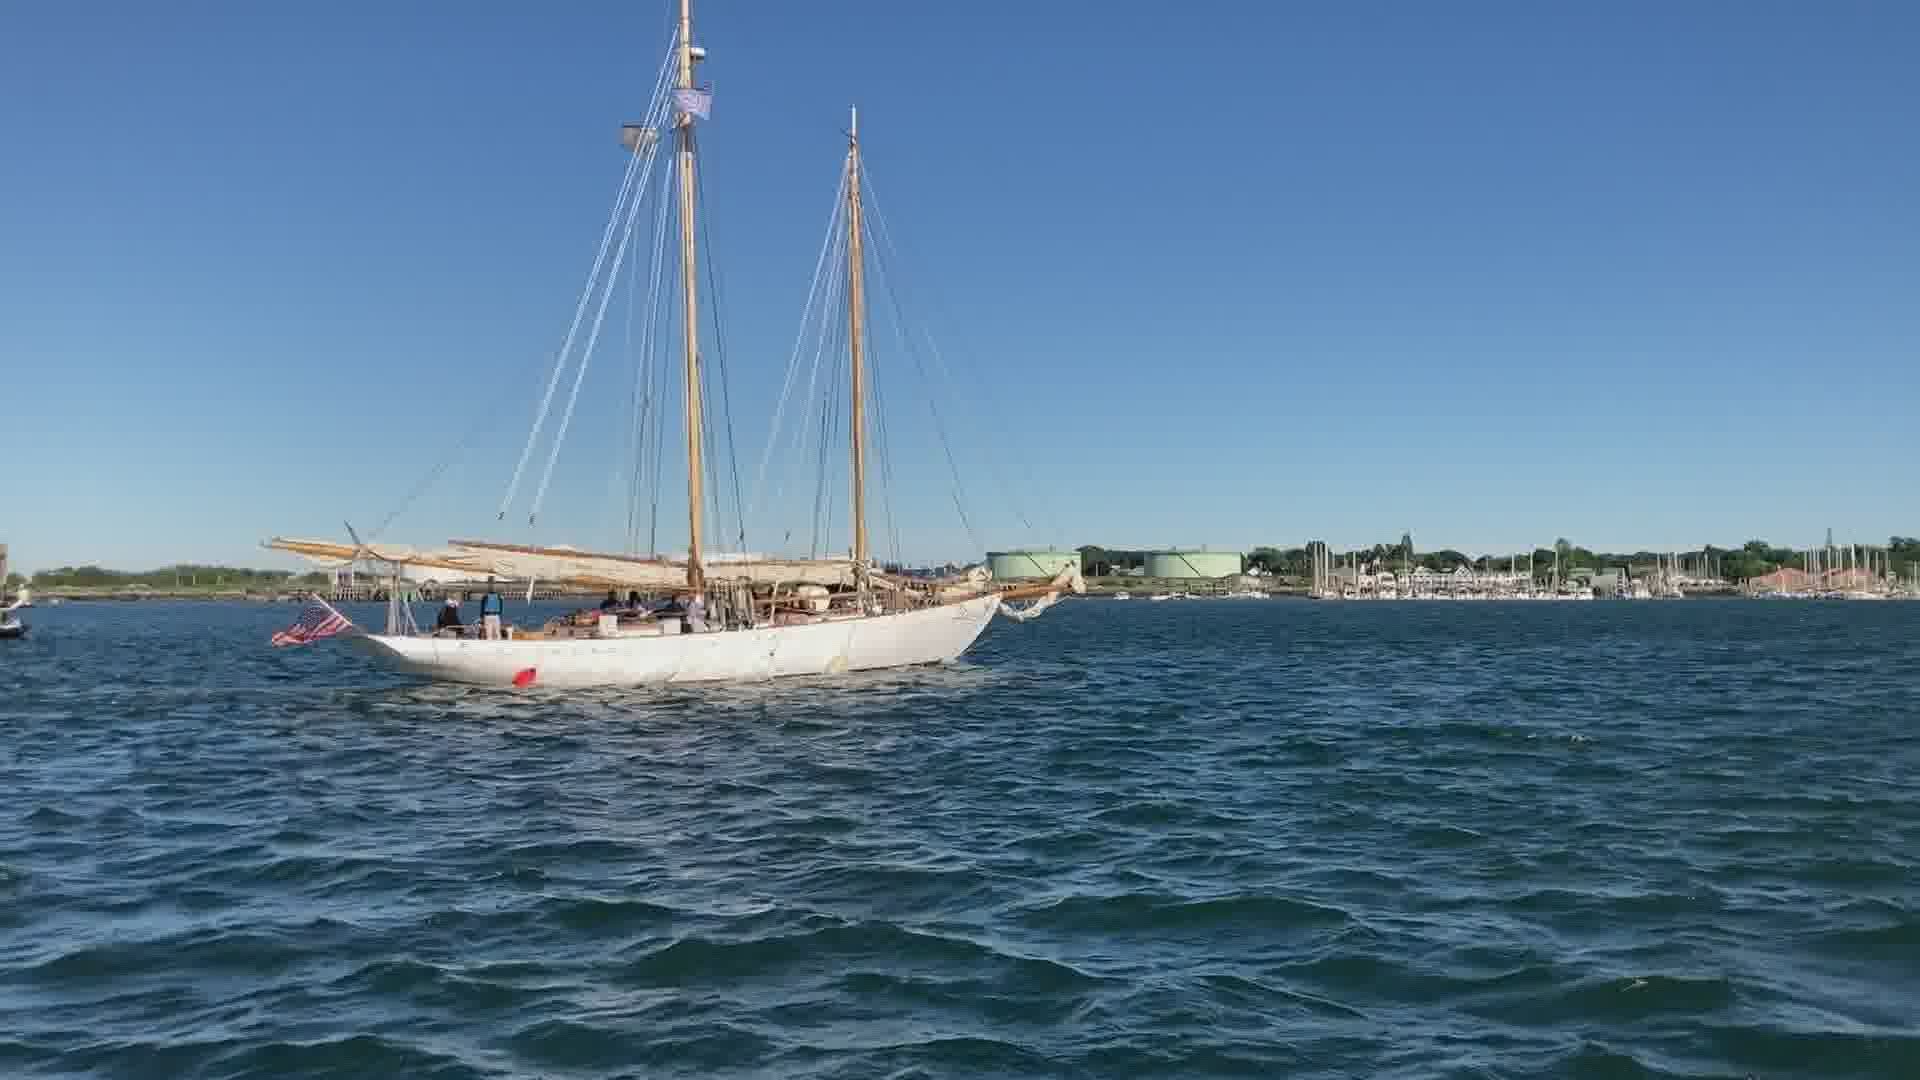 Meteorologist Mallory Brooke goes sailing on the Timberwind schooner from the Portland schooner company.